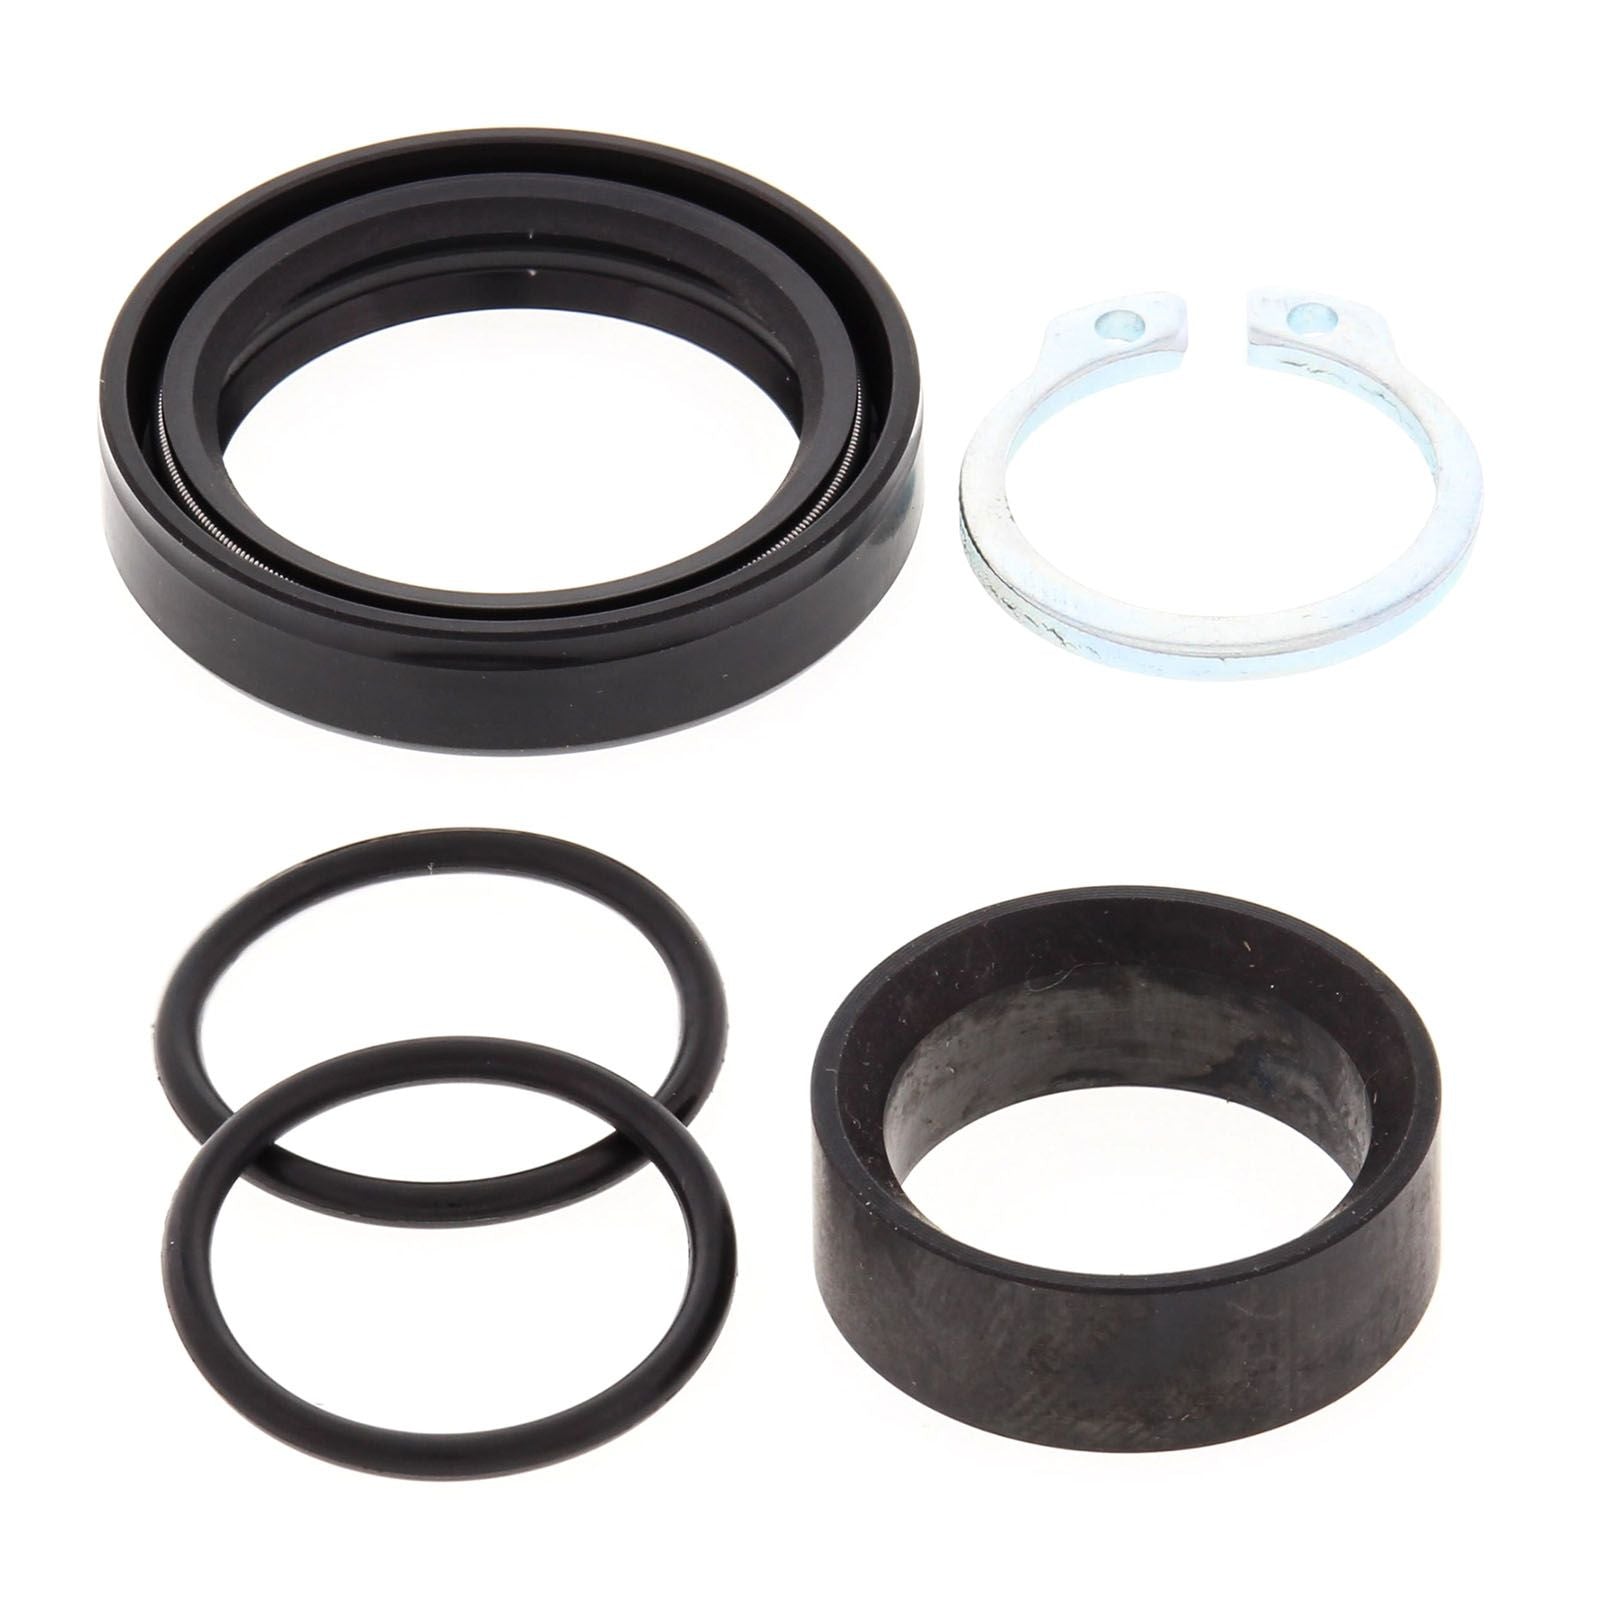 New ALL BALLS Racing Countershaft Seal Kit For KTM SX/XC/65 2009-2015 #AB254006